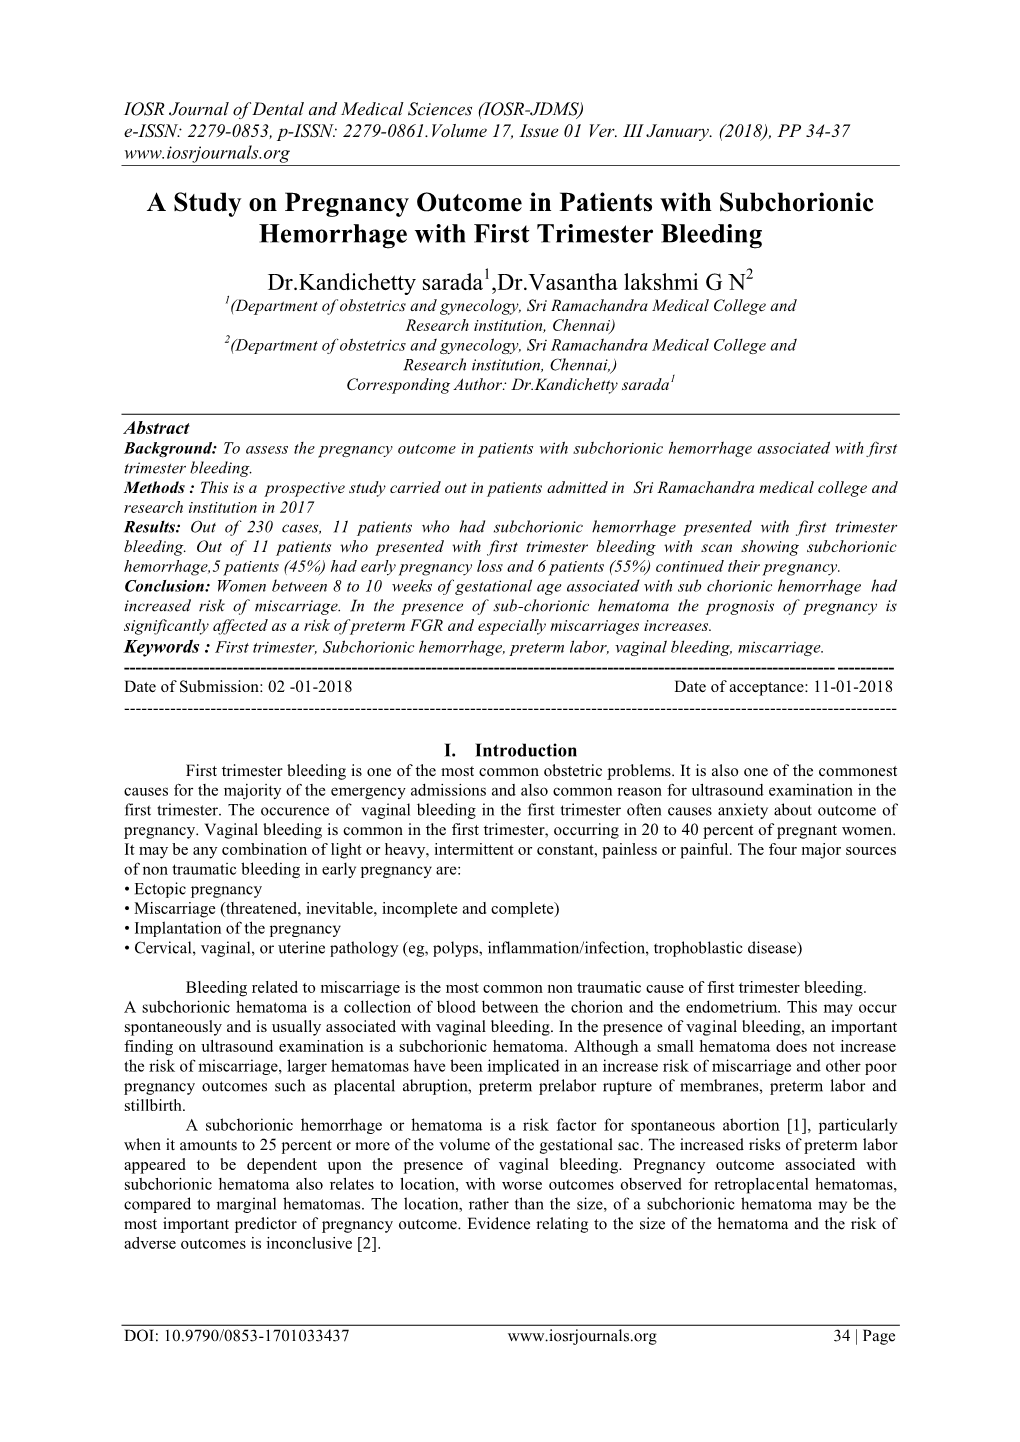 A Study on Pregnancy Outcome in Patients with Subchorionic Hemorrhage with First Trimester Bleeding